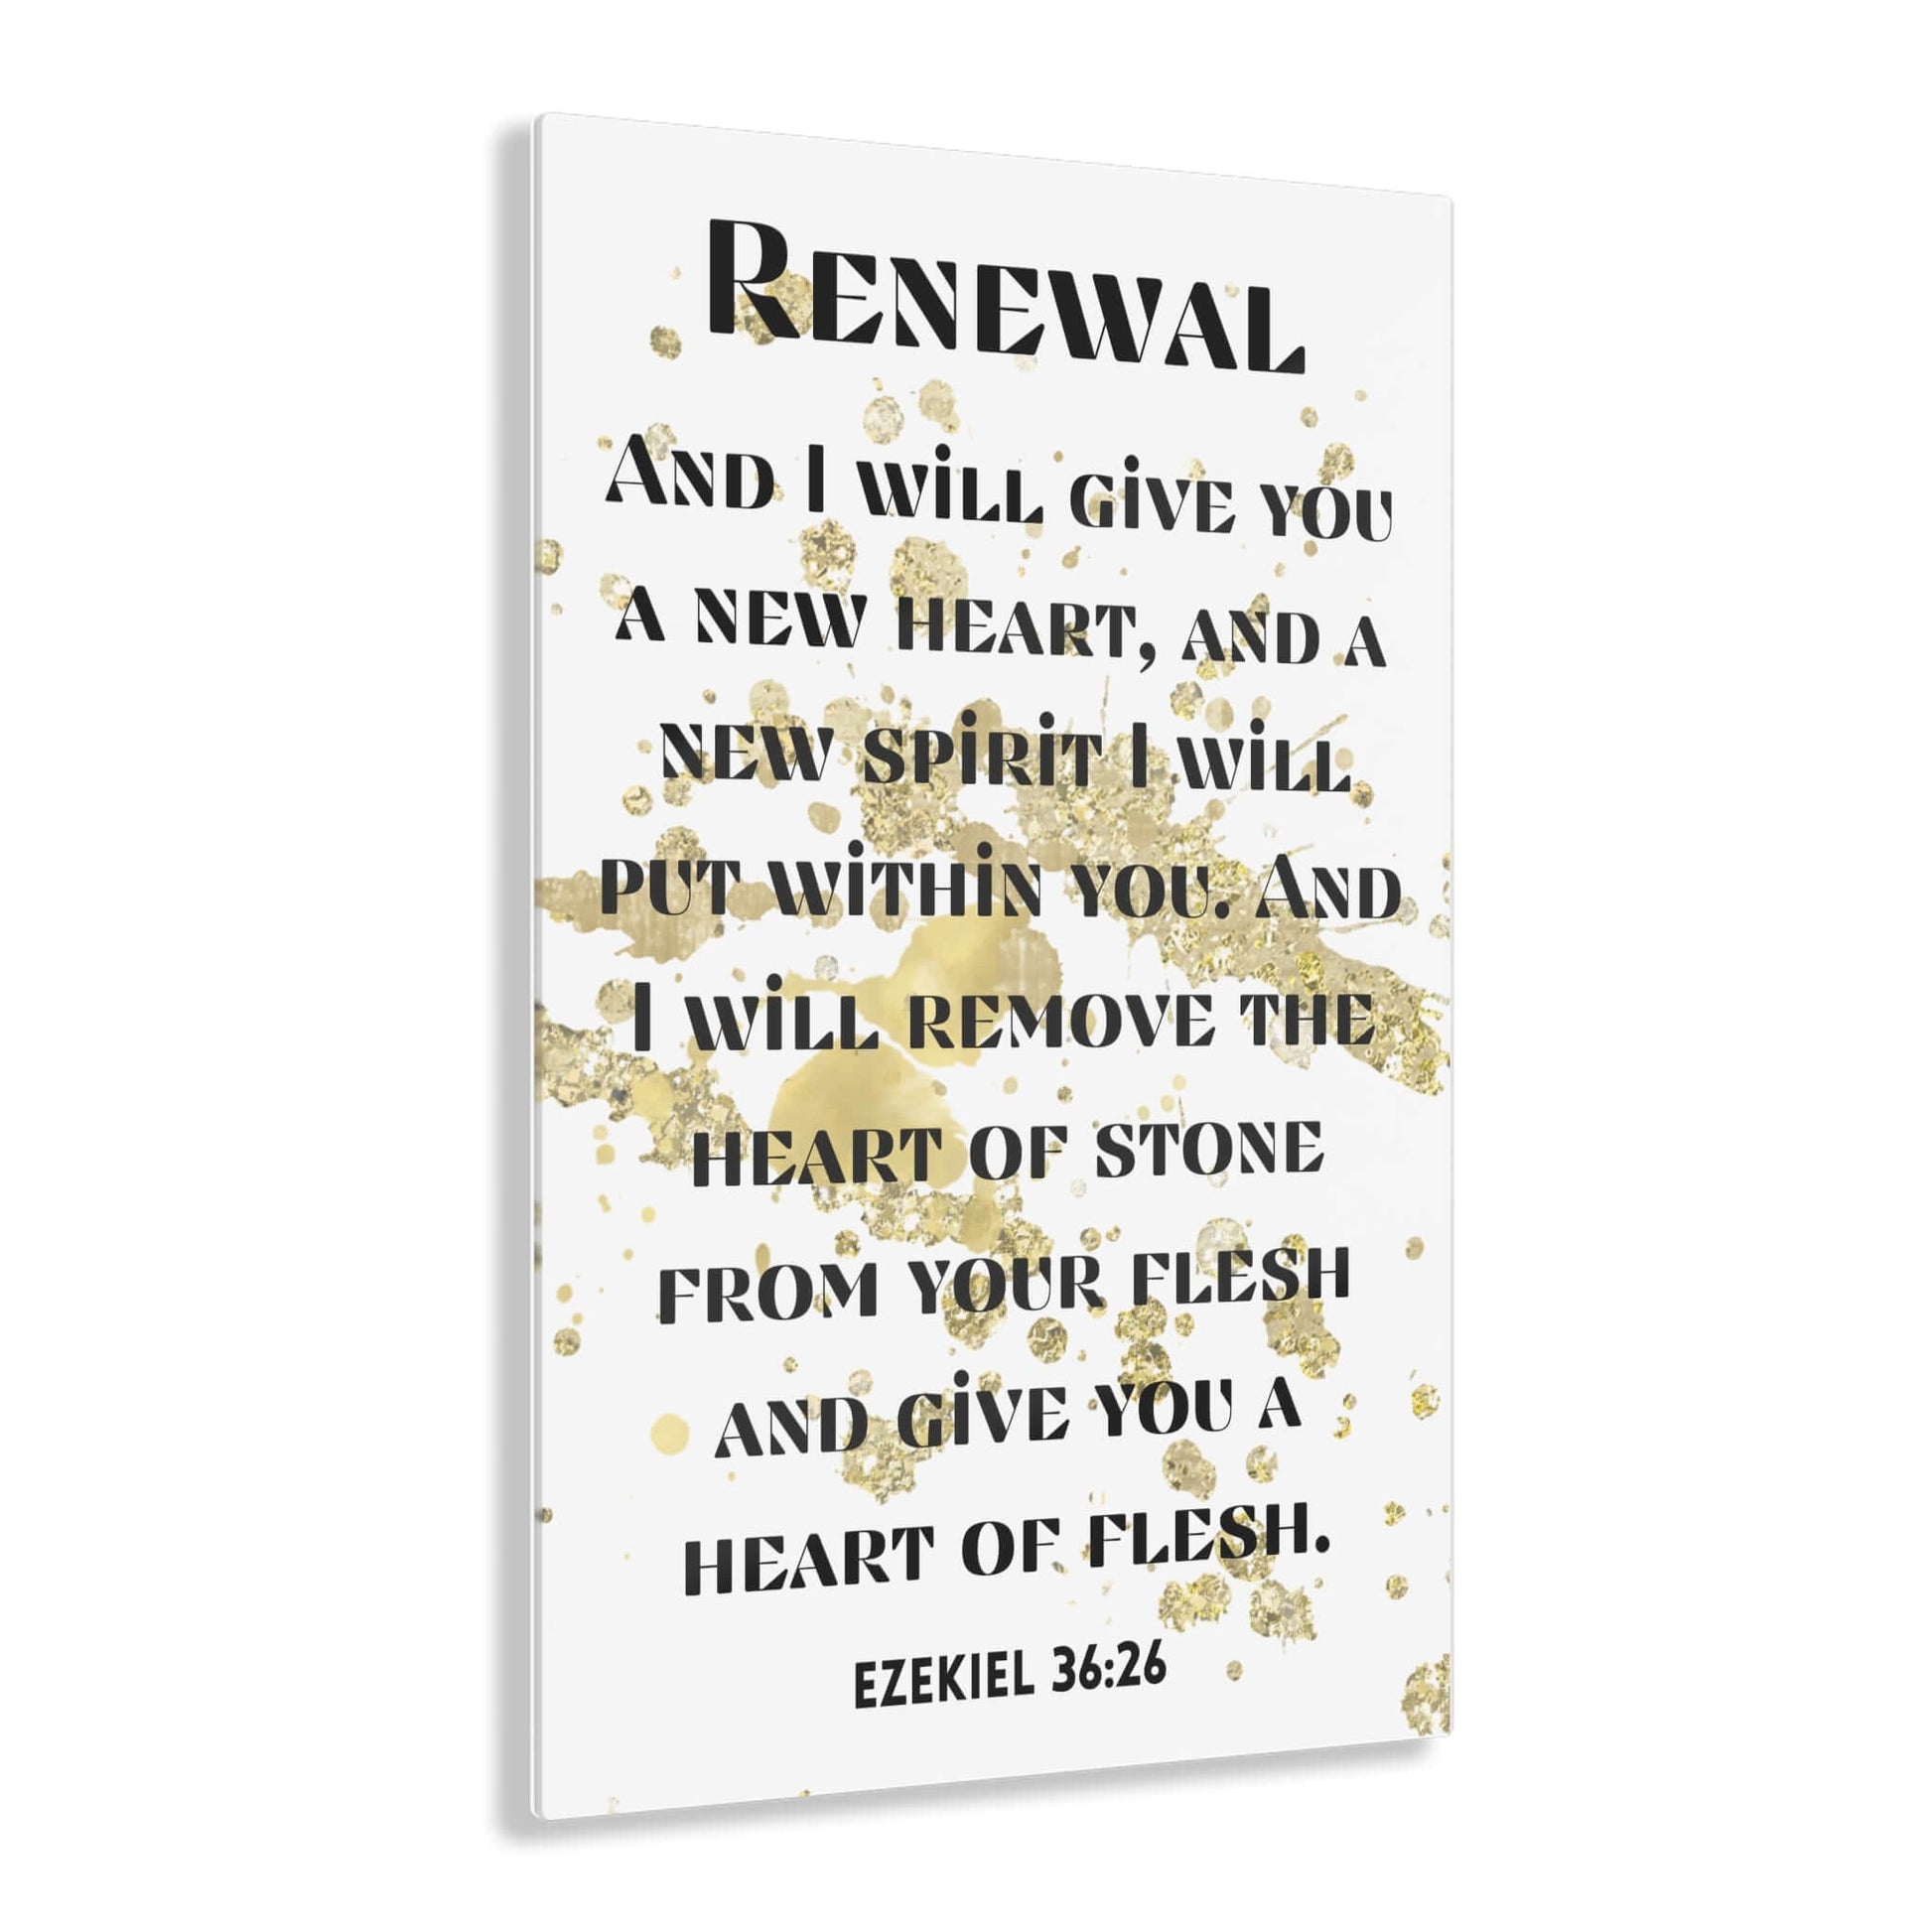 Cute Artwork - Acrylic Wall Art with Inspirational Scripture | Art & Wall Decor,Assembled in the USA,Assembled in USA,Decor,Home & Living,Home Decor,Indoor,Made in the USA,Made in USA,Poster